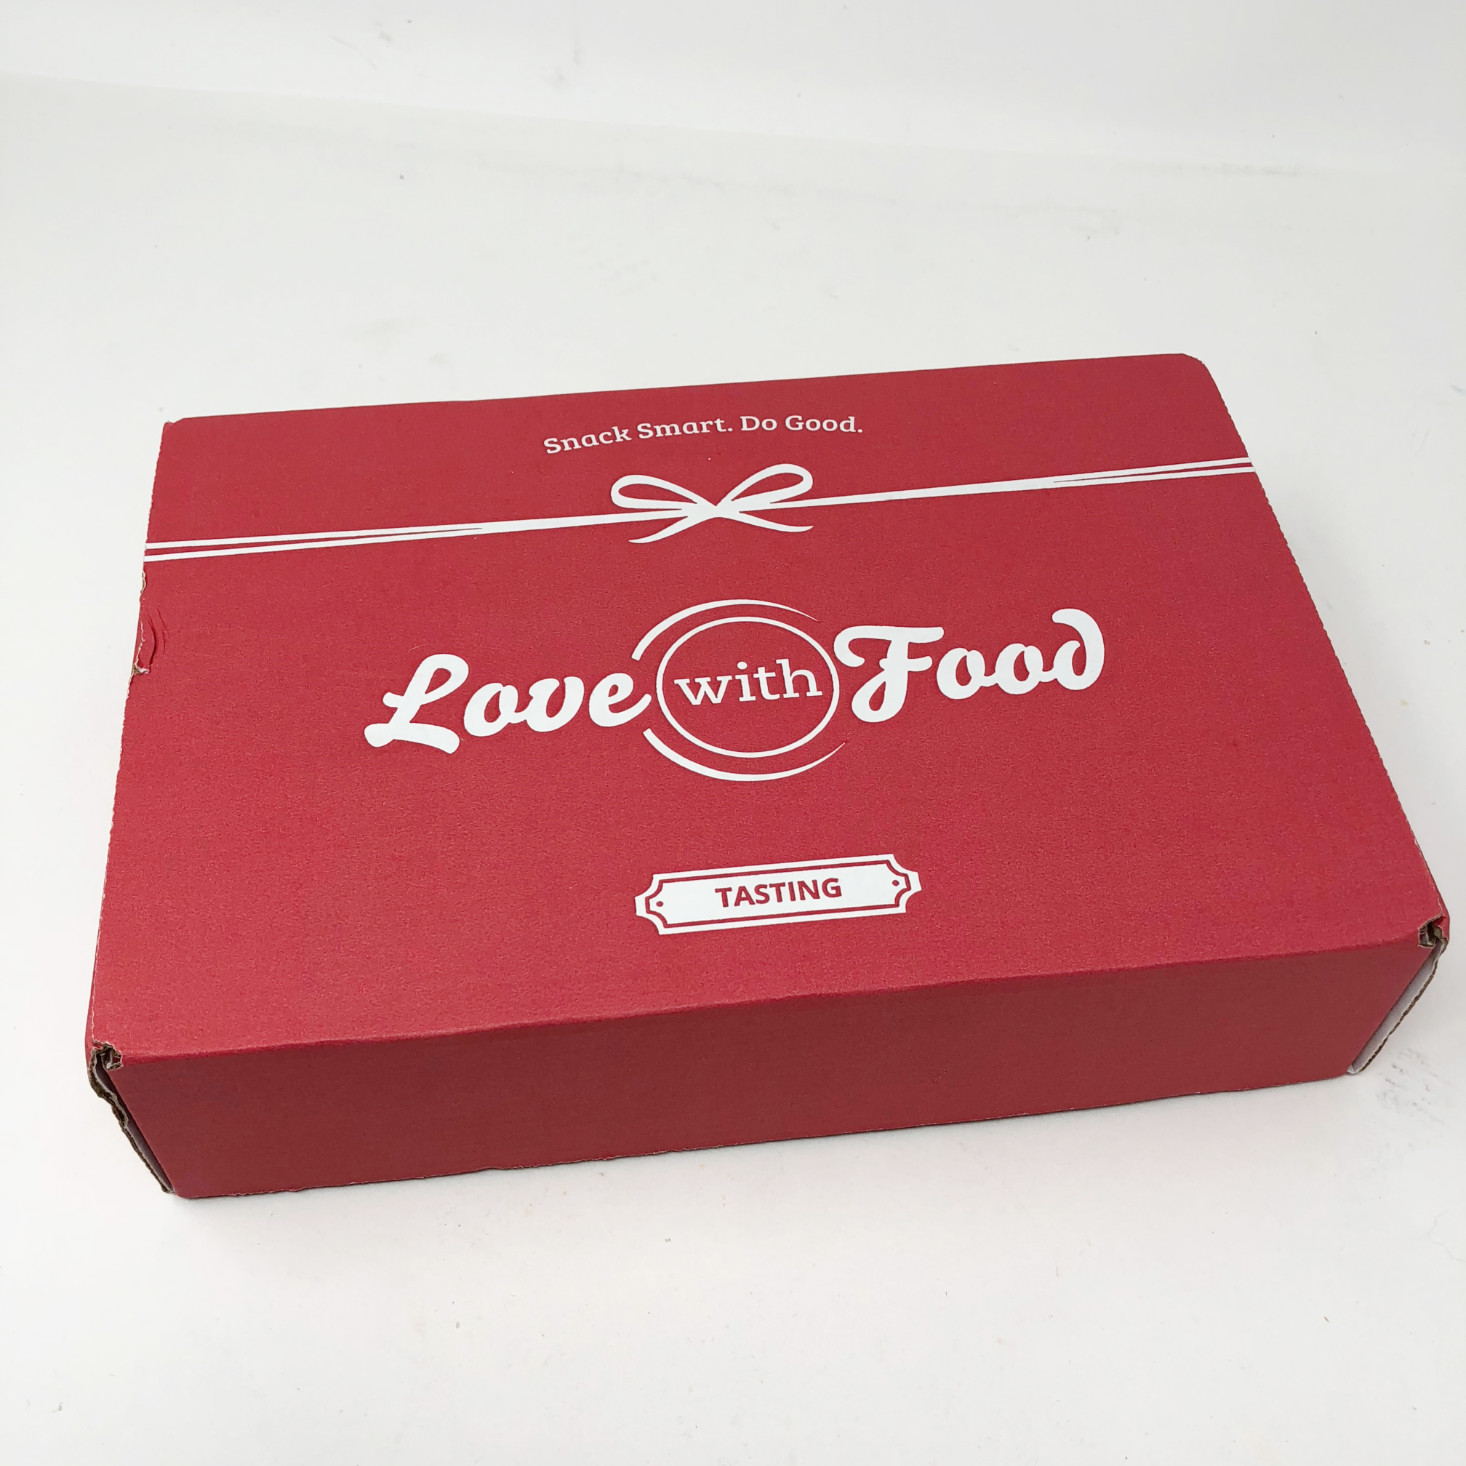 Love with Food Tasting Box Review + Coupon – August 2018